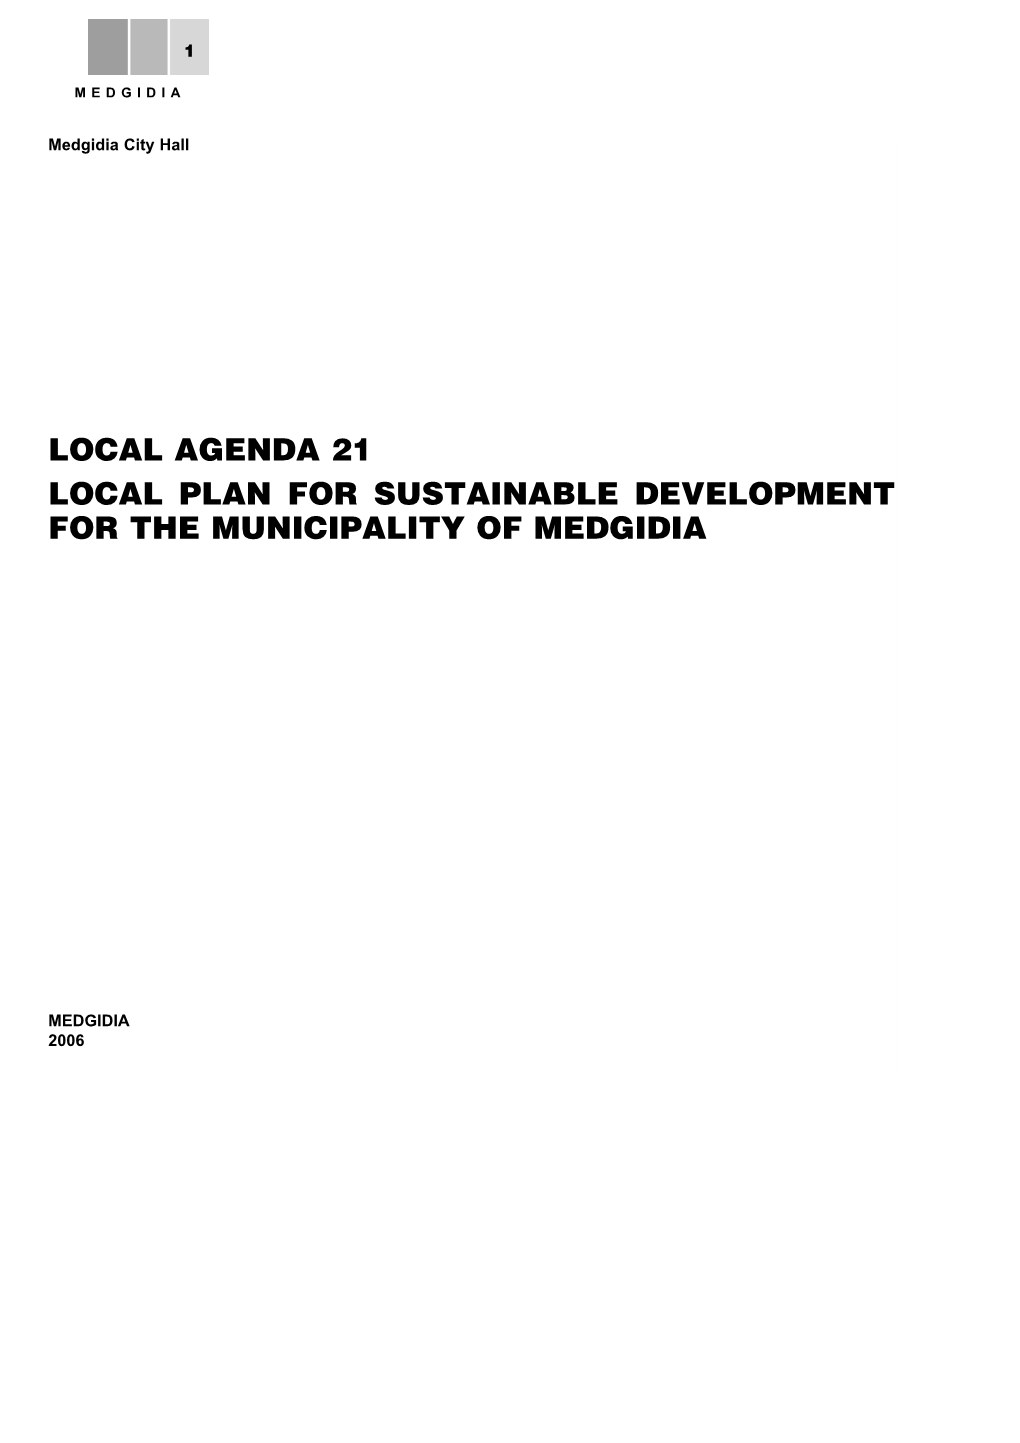 Local Agenda 21 Local Plan for Sustainable Development for the Municipality of Medgidia